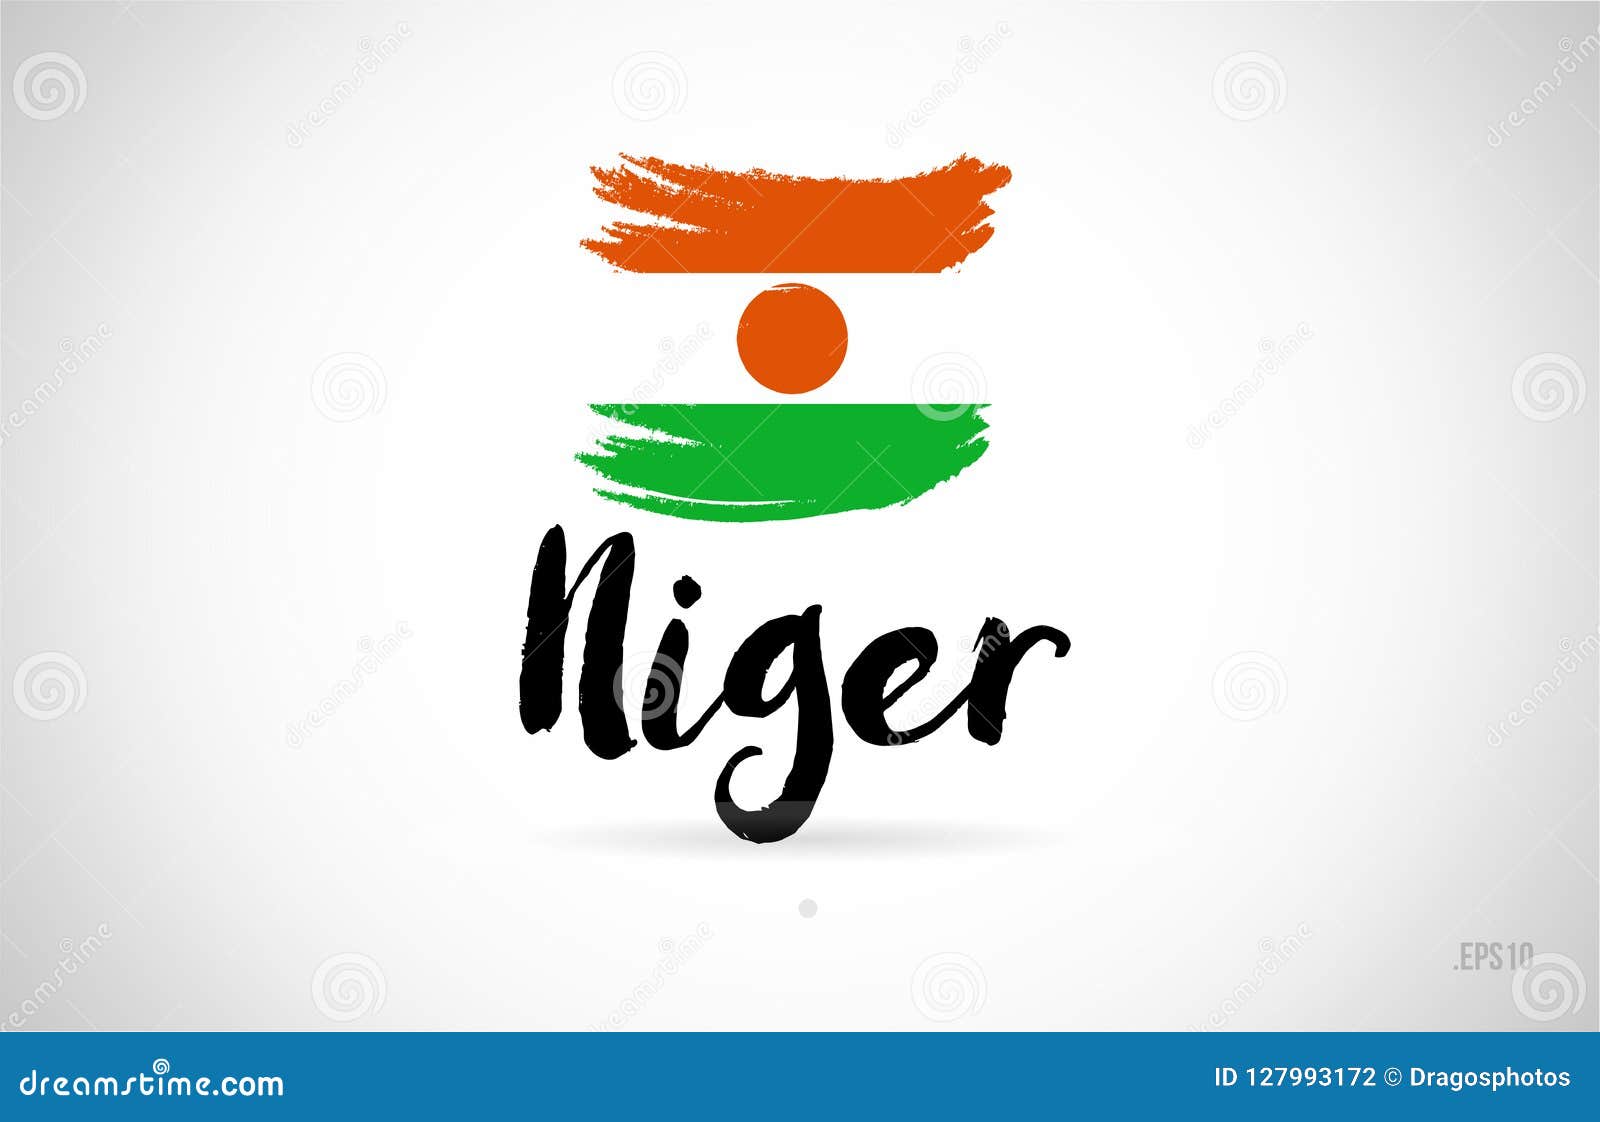 niger country flag concept with grunge design icon logo. niger country flag concept with grunge design suitable for a logo icon design